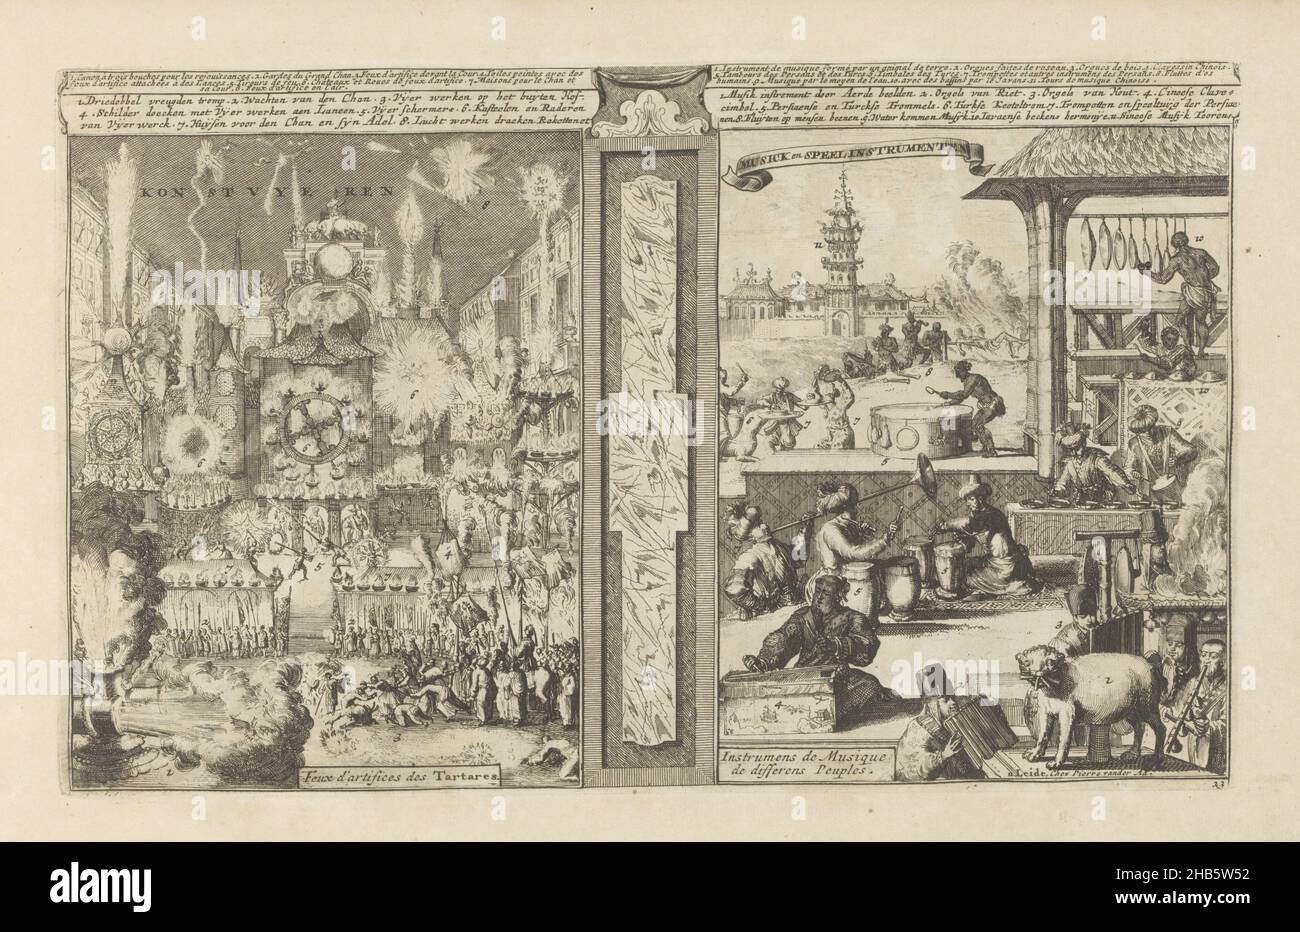 Fireworks and music, Konst vyeren, Feux d'artifices des Tartares, Musick and Playing Instruments, Instrument de Musique de differens Peuples (title on object), Les Indes Orientales et Occidentales et autres lieux (series title), Presentation in two parts. On the left, fireworks by the Tartars. On the right, Javanese, Persians, Turks and Chinese play musical instruments. There is an organ made of reeds and one made of wood, a Chinese harpsichord, Persian and Turkish drums, flutes made of bones, Javanese cymbals, water bowls etc. With a legend in Dutch and French. The print is part of an album Stock Photo